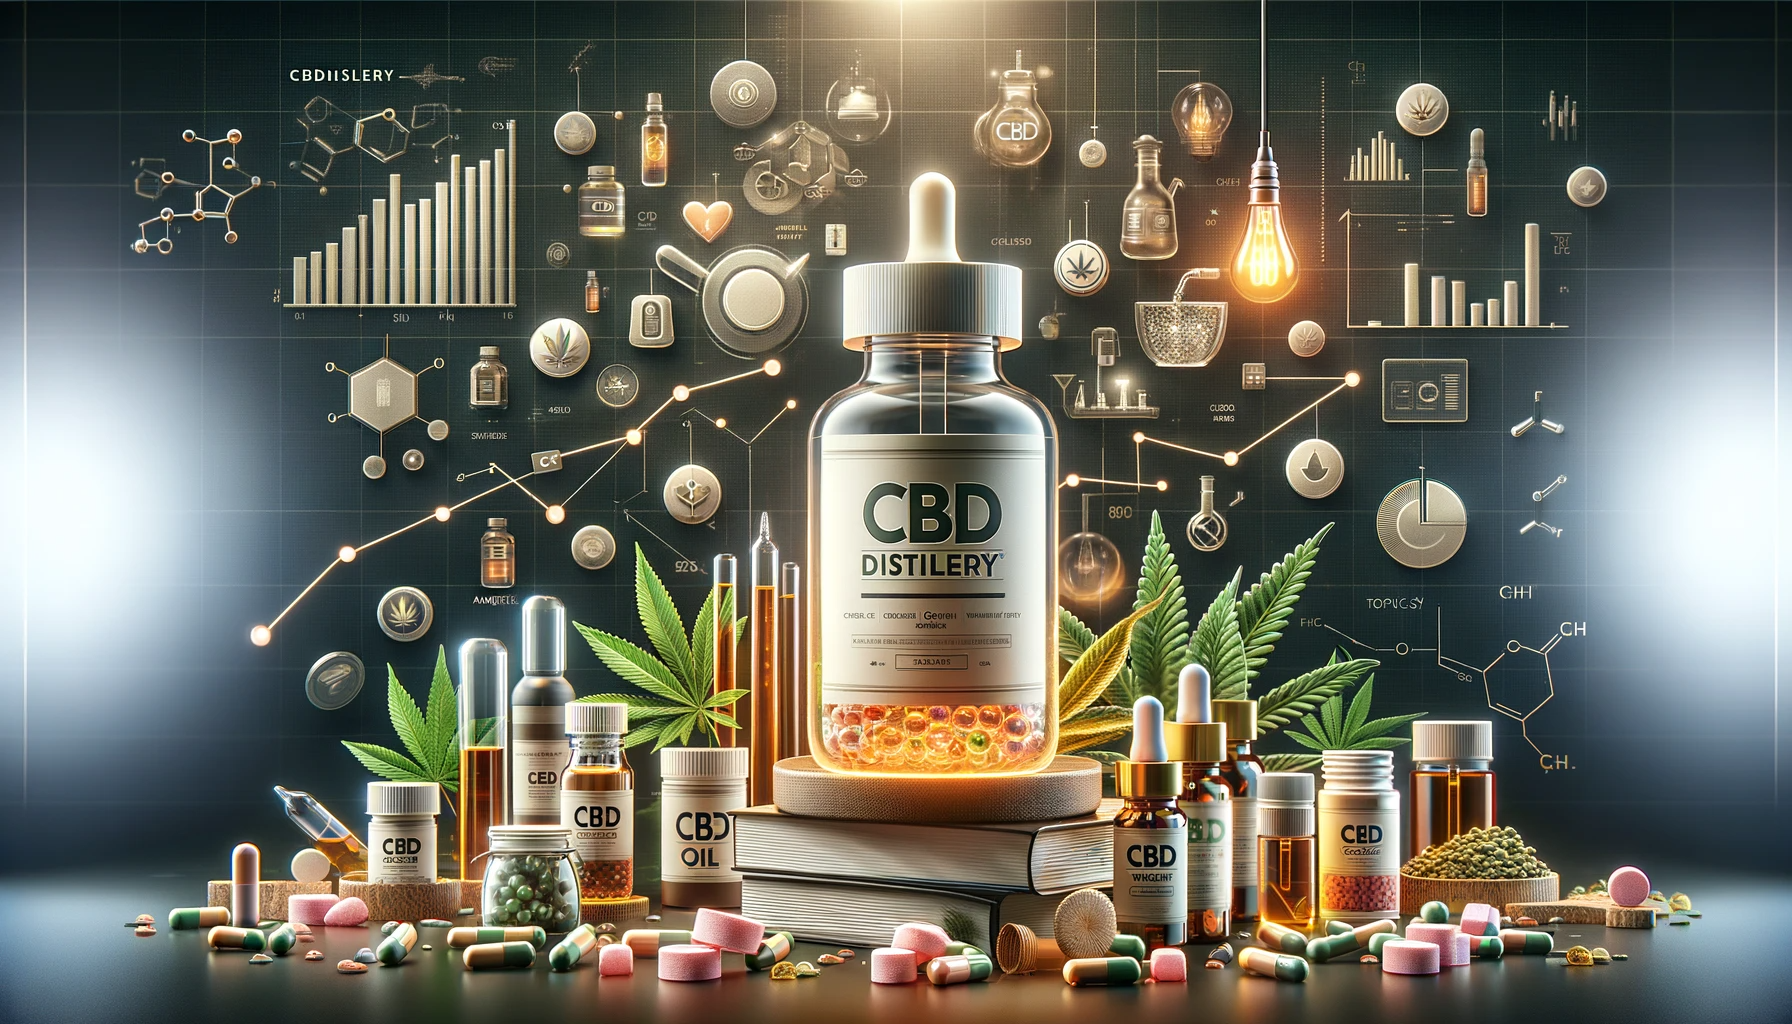 professional featured image for a blog post about CBDistillery's impact on the American CBD landscape